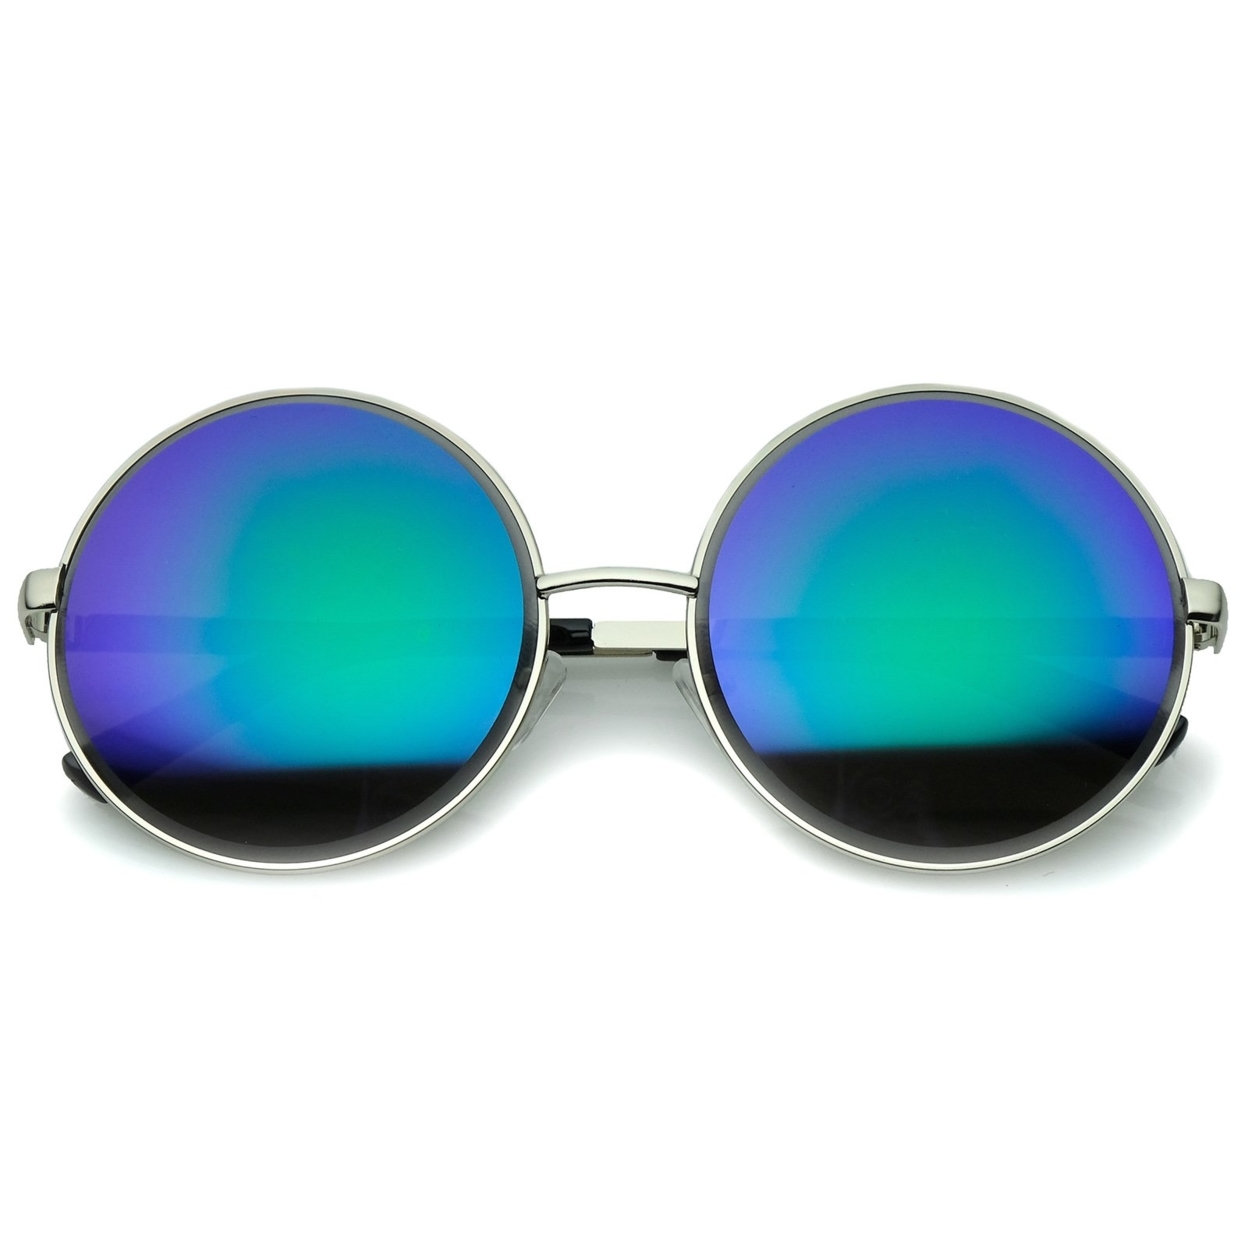 Oversize Metal Frame Etched Edge Colored Mirror Lens Round Sunglasses 60mm - Gold / Green-Purple Mirror